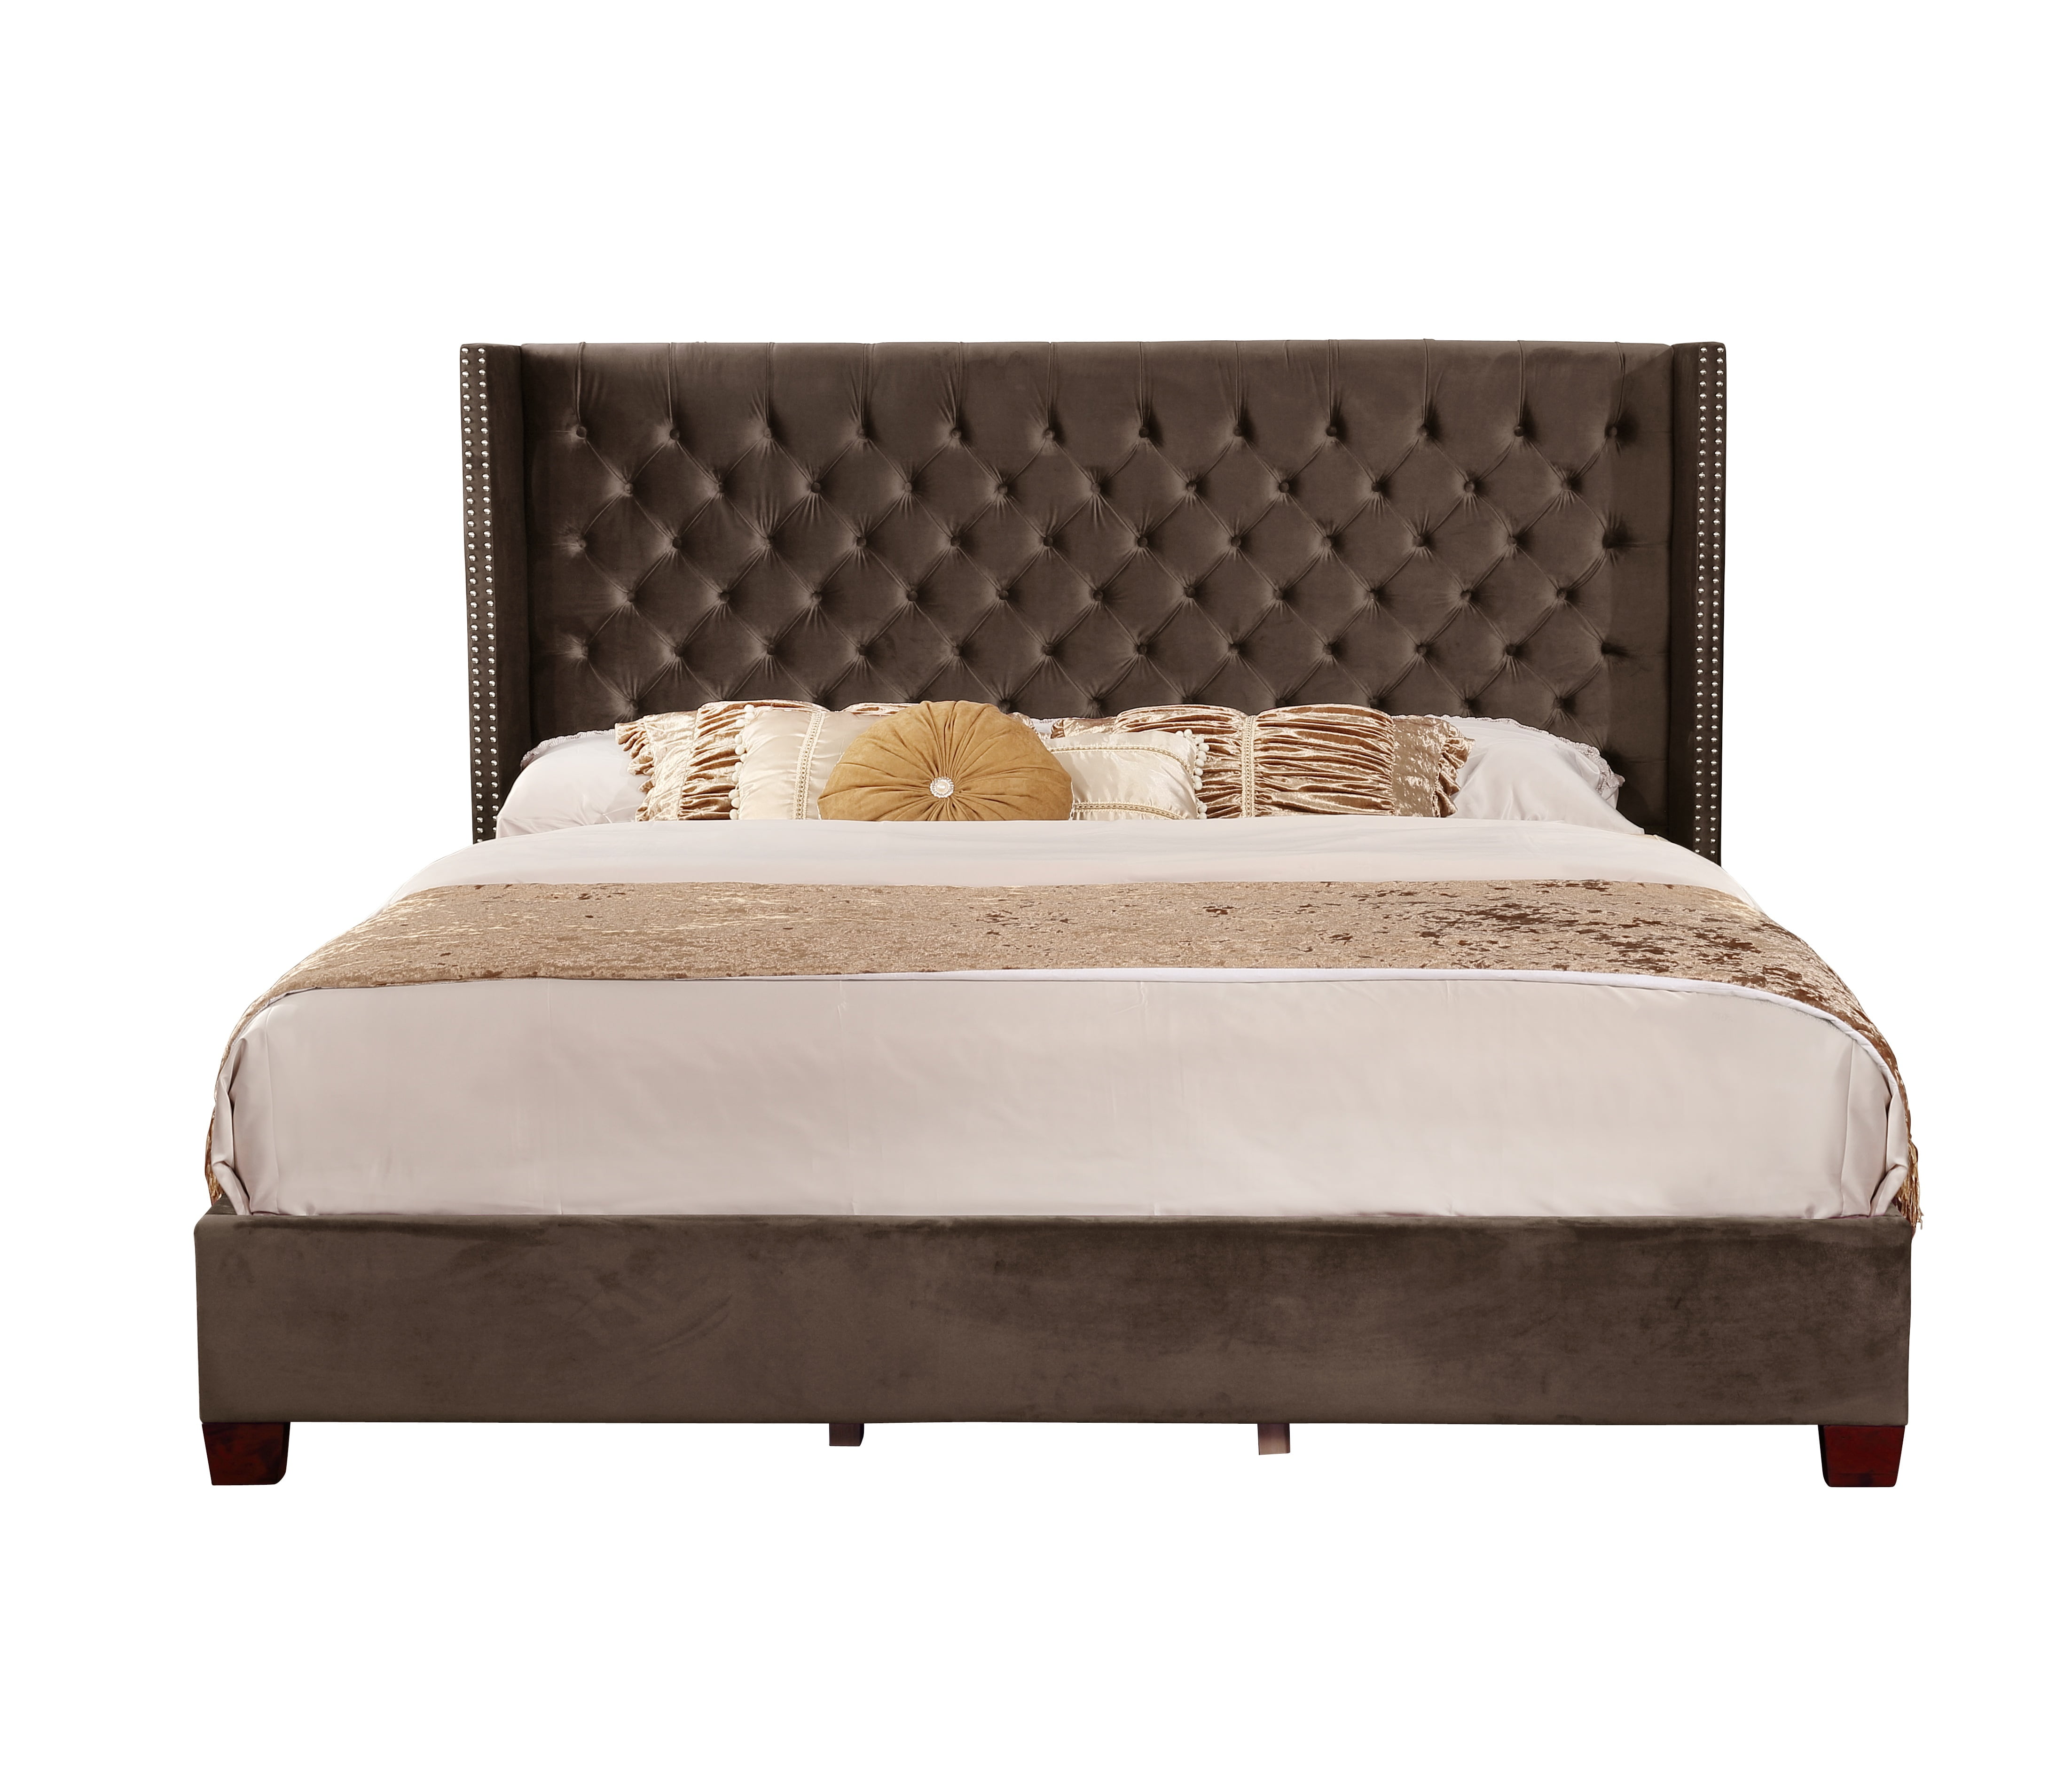 King Size On Tufted Wingback Bed, King Size Wingback Bed